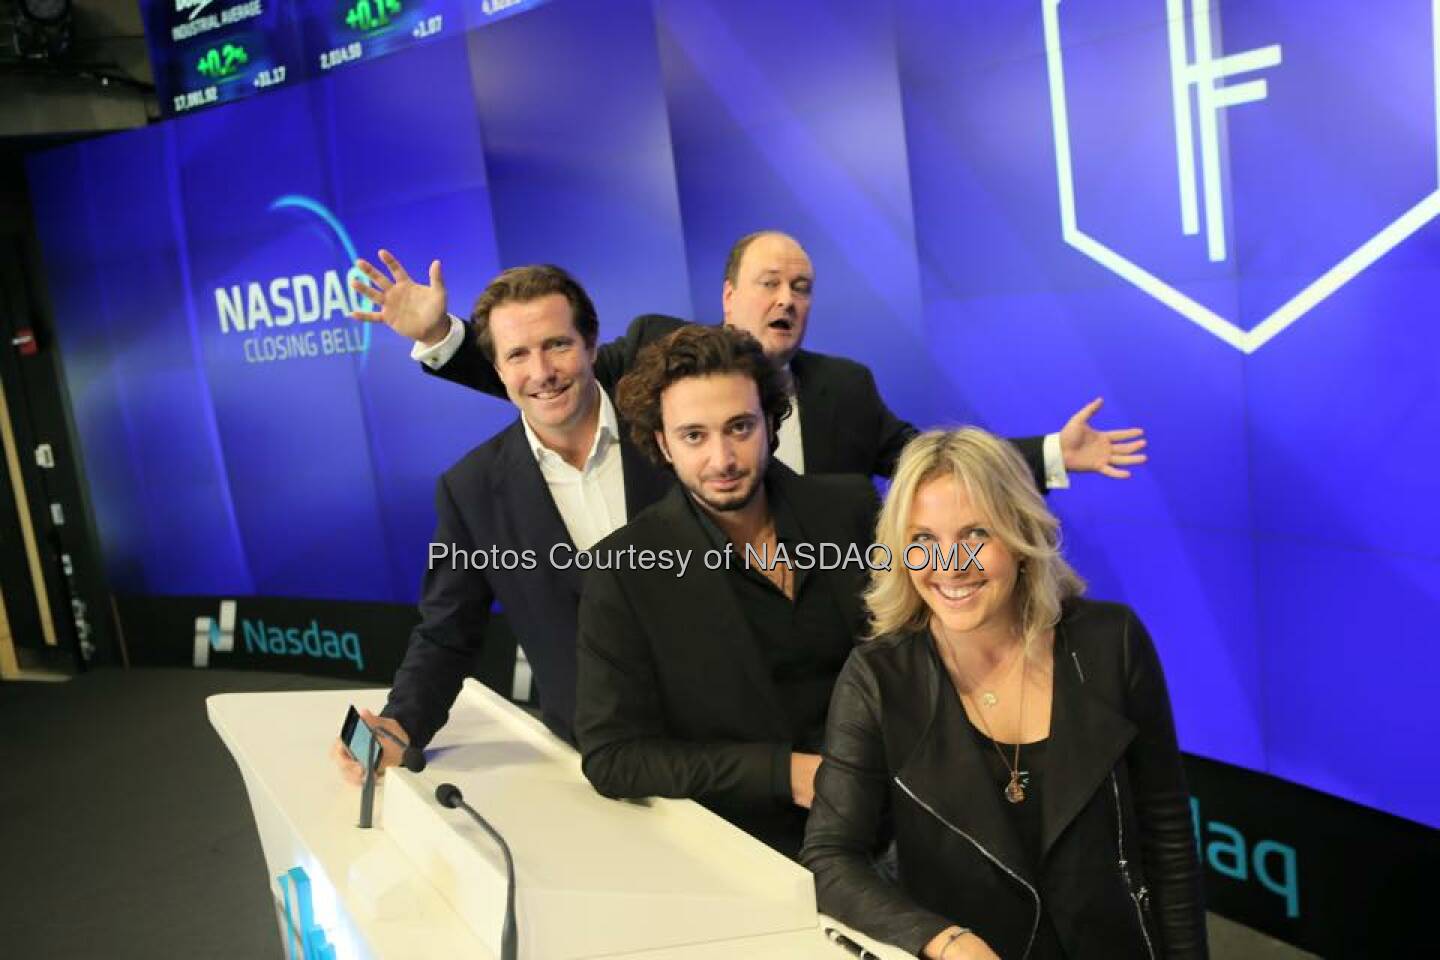 Great photos from the Founders Forum Closing Bell Ceremony!  Source: http://facebook.com/NASDAQ